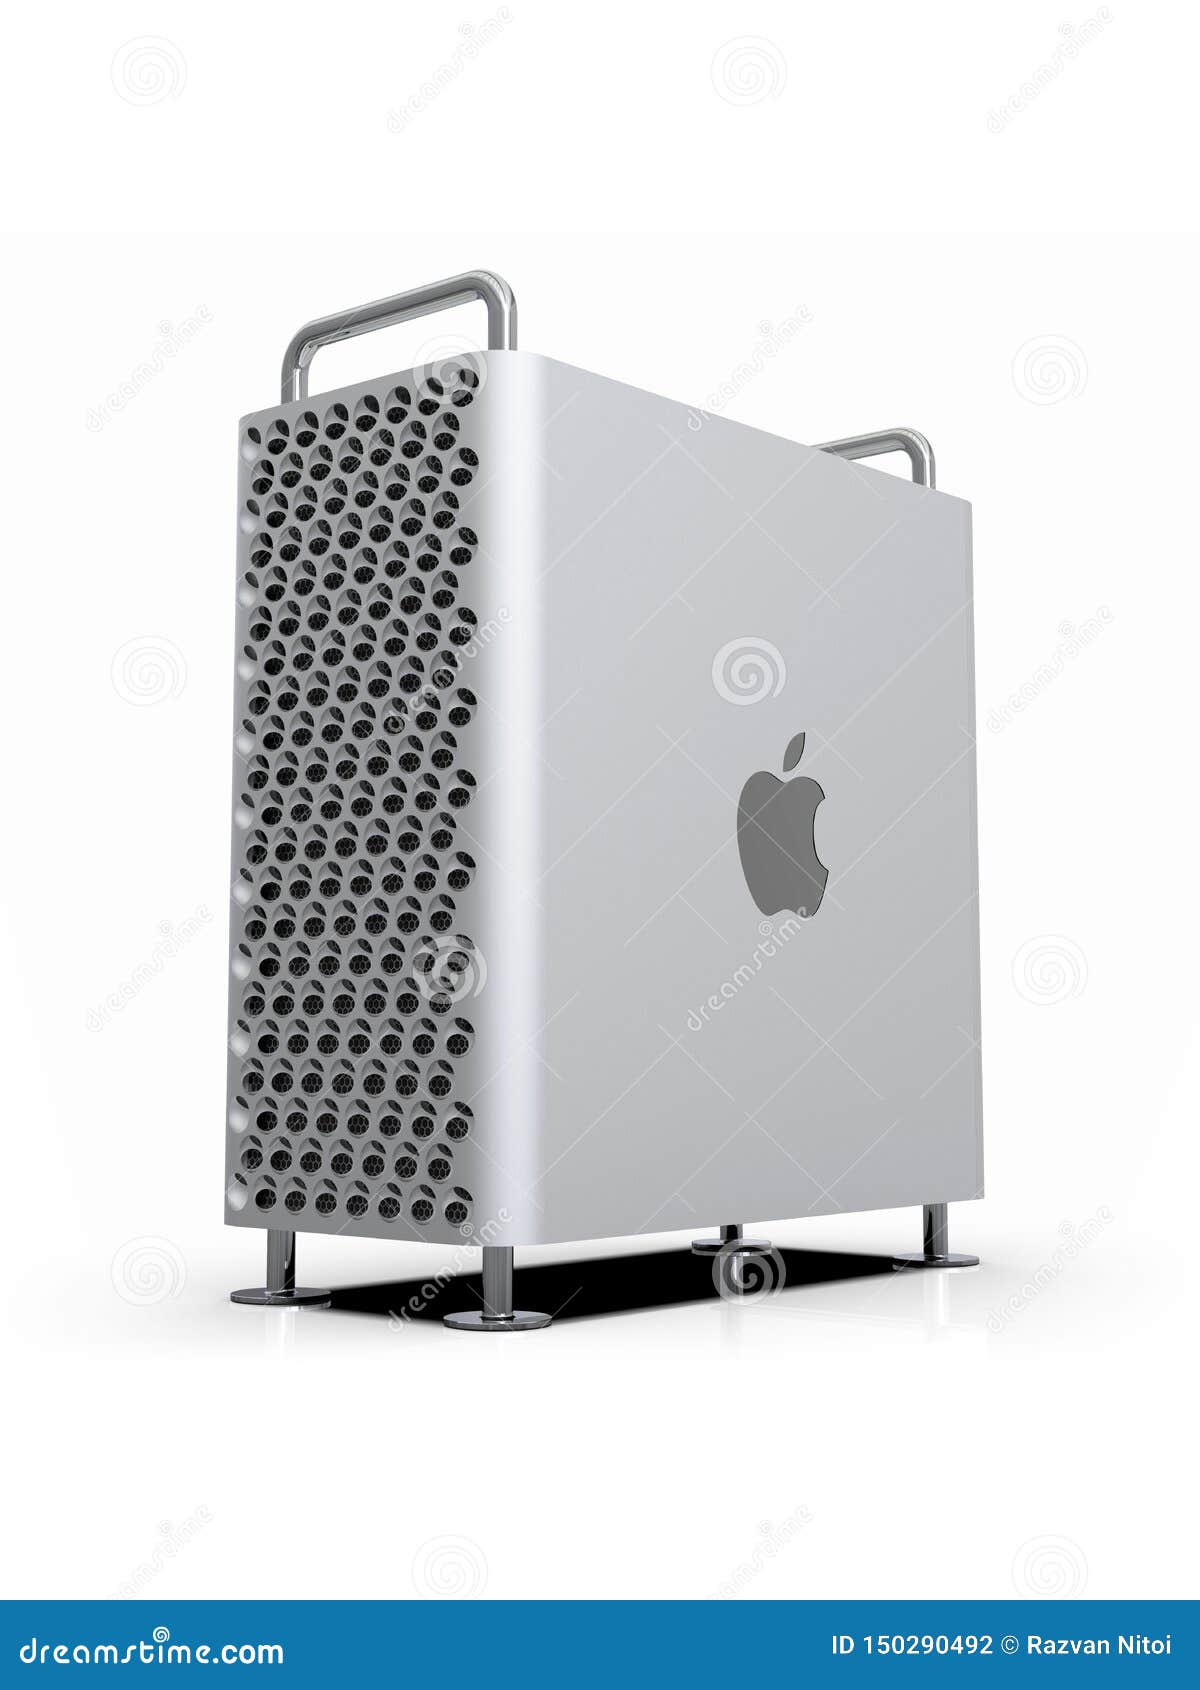 steel video card for mac pro tower